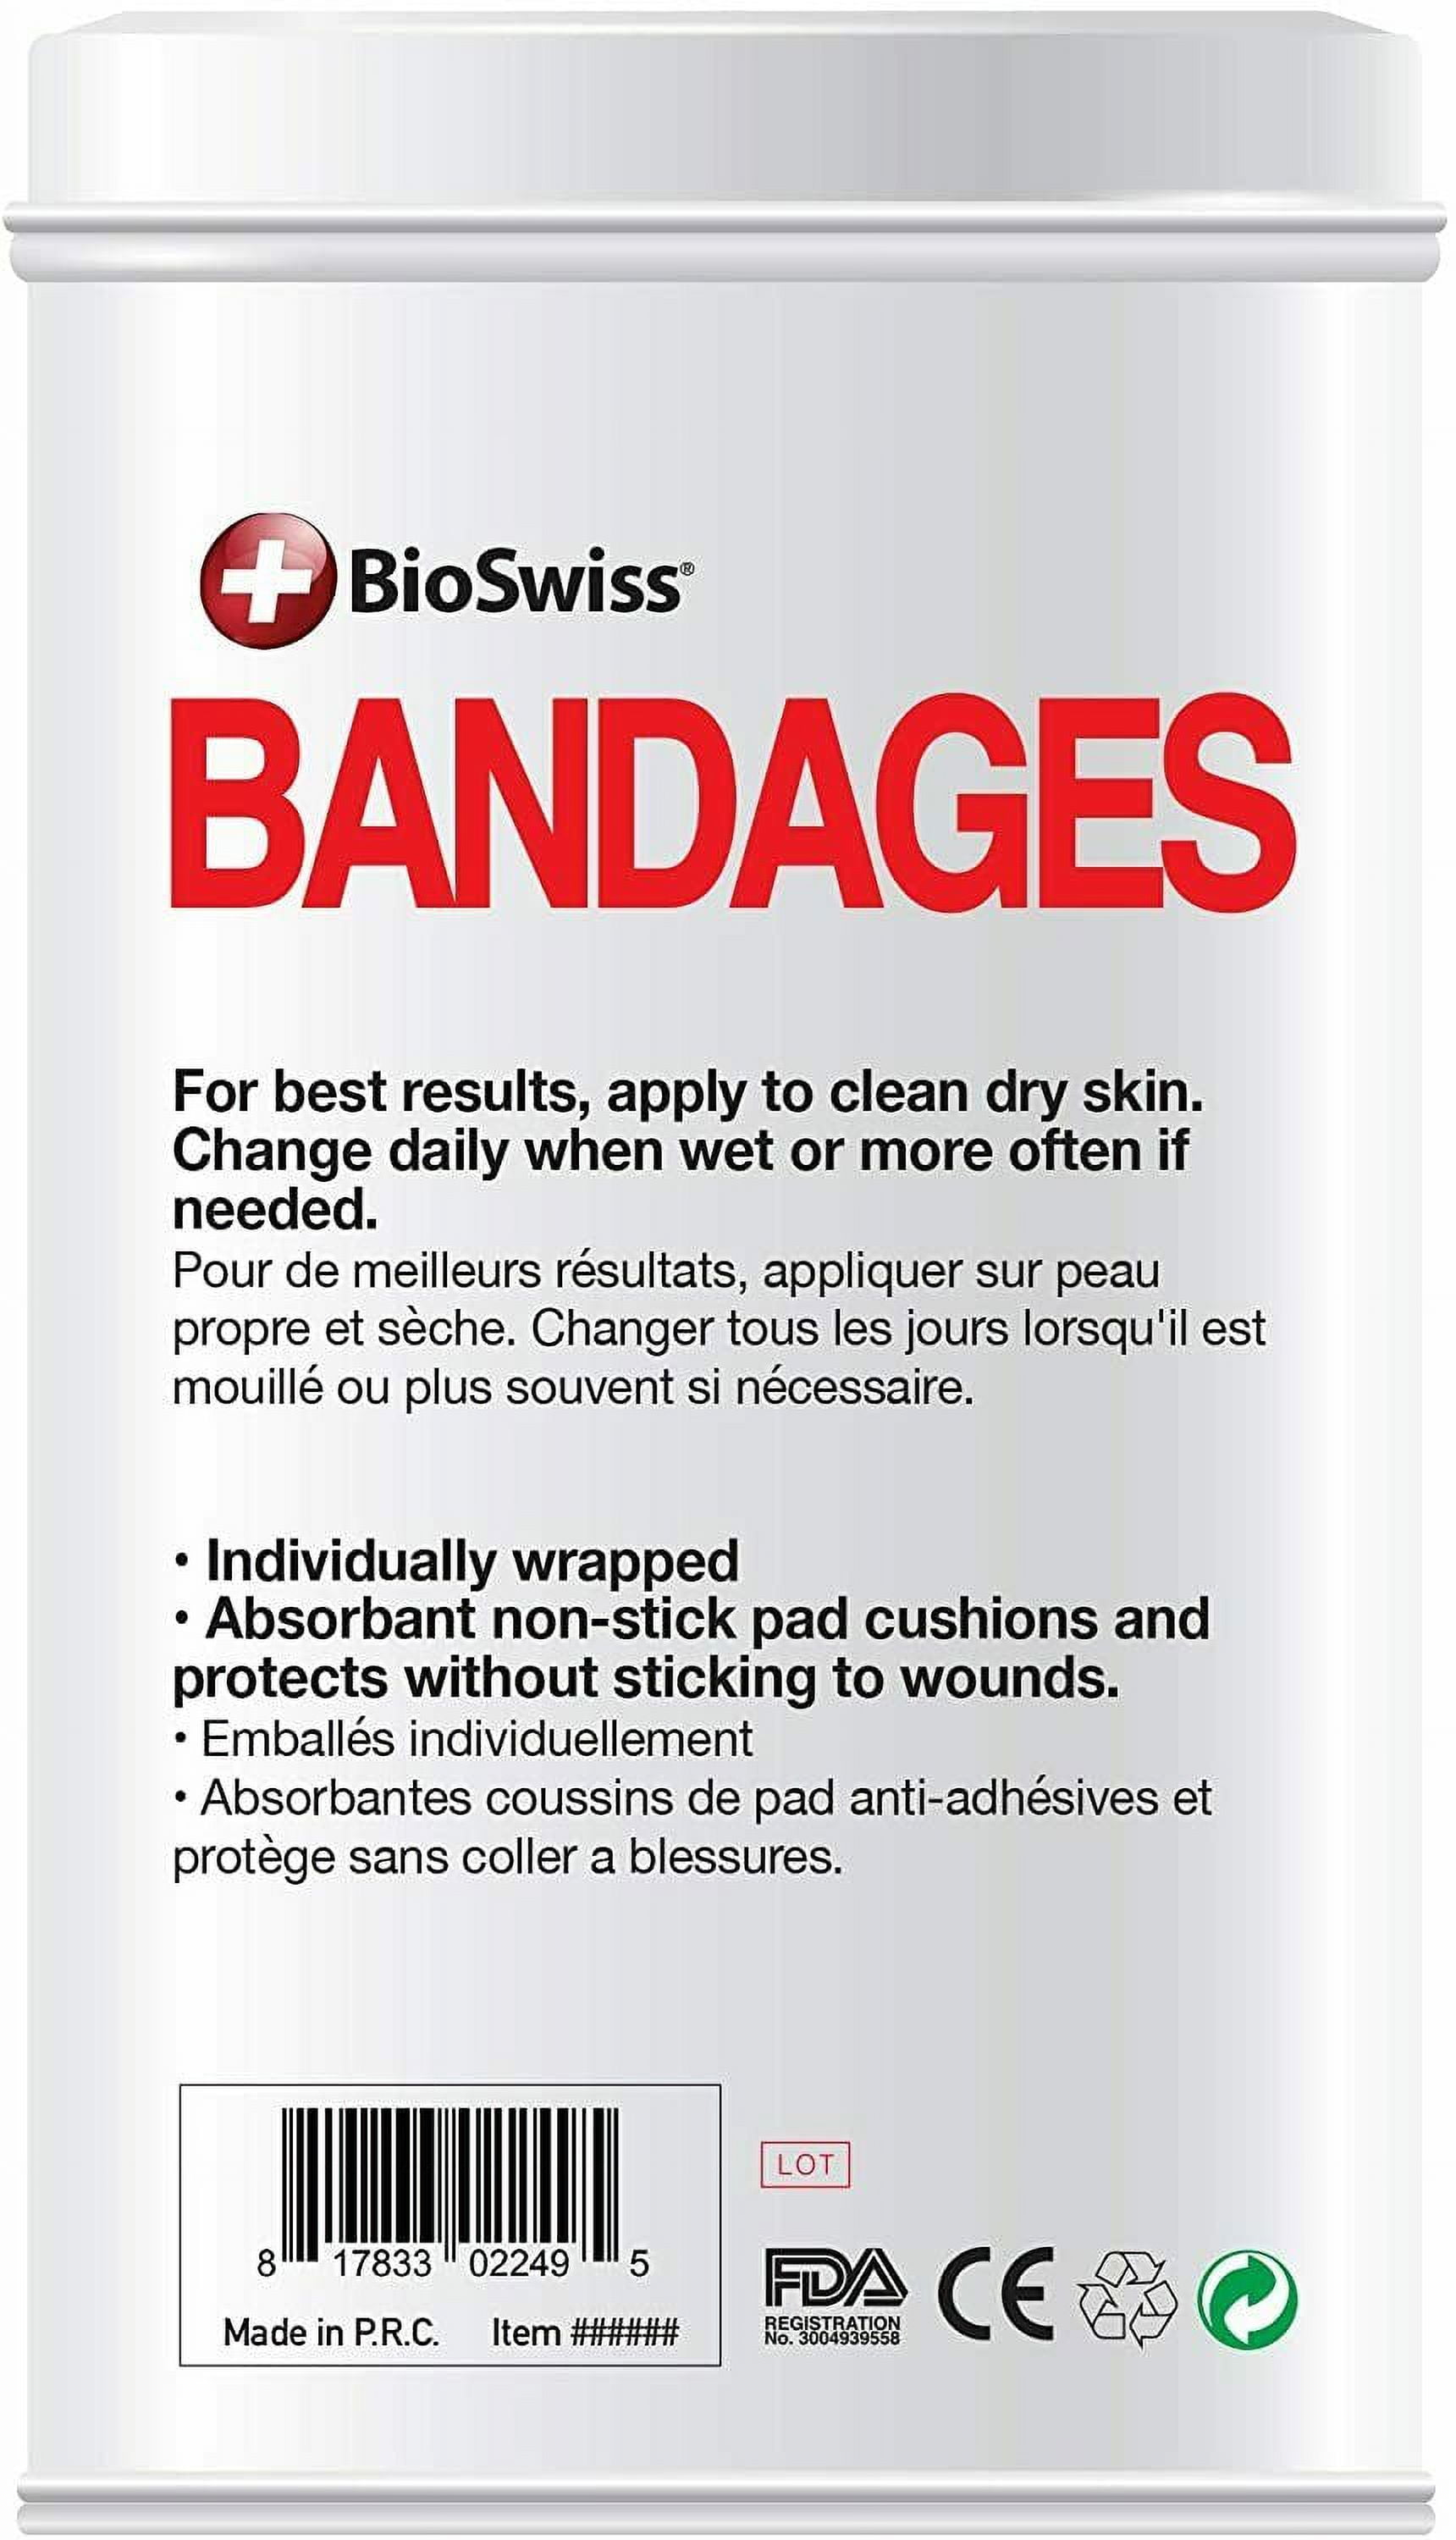 BioSwiss Bandages, Lips Shaped Self Adhesive Bandage, Latex Free Sterile  Wound Care, Fun First Aid Kit Supplies for Kids and Adults, 50 Count 